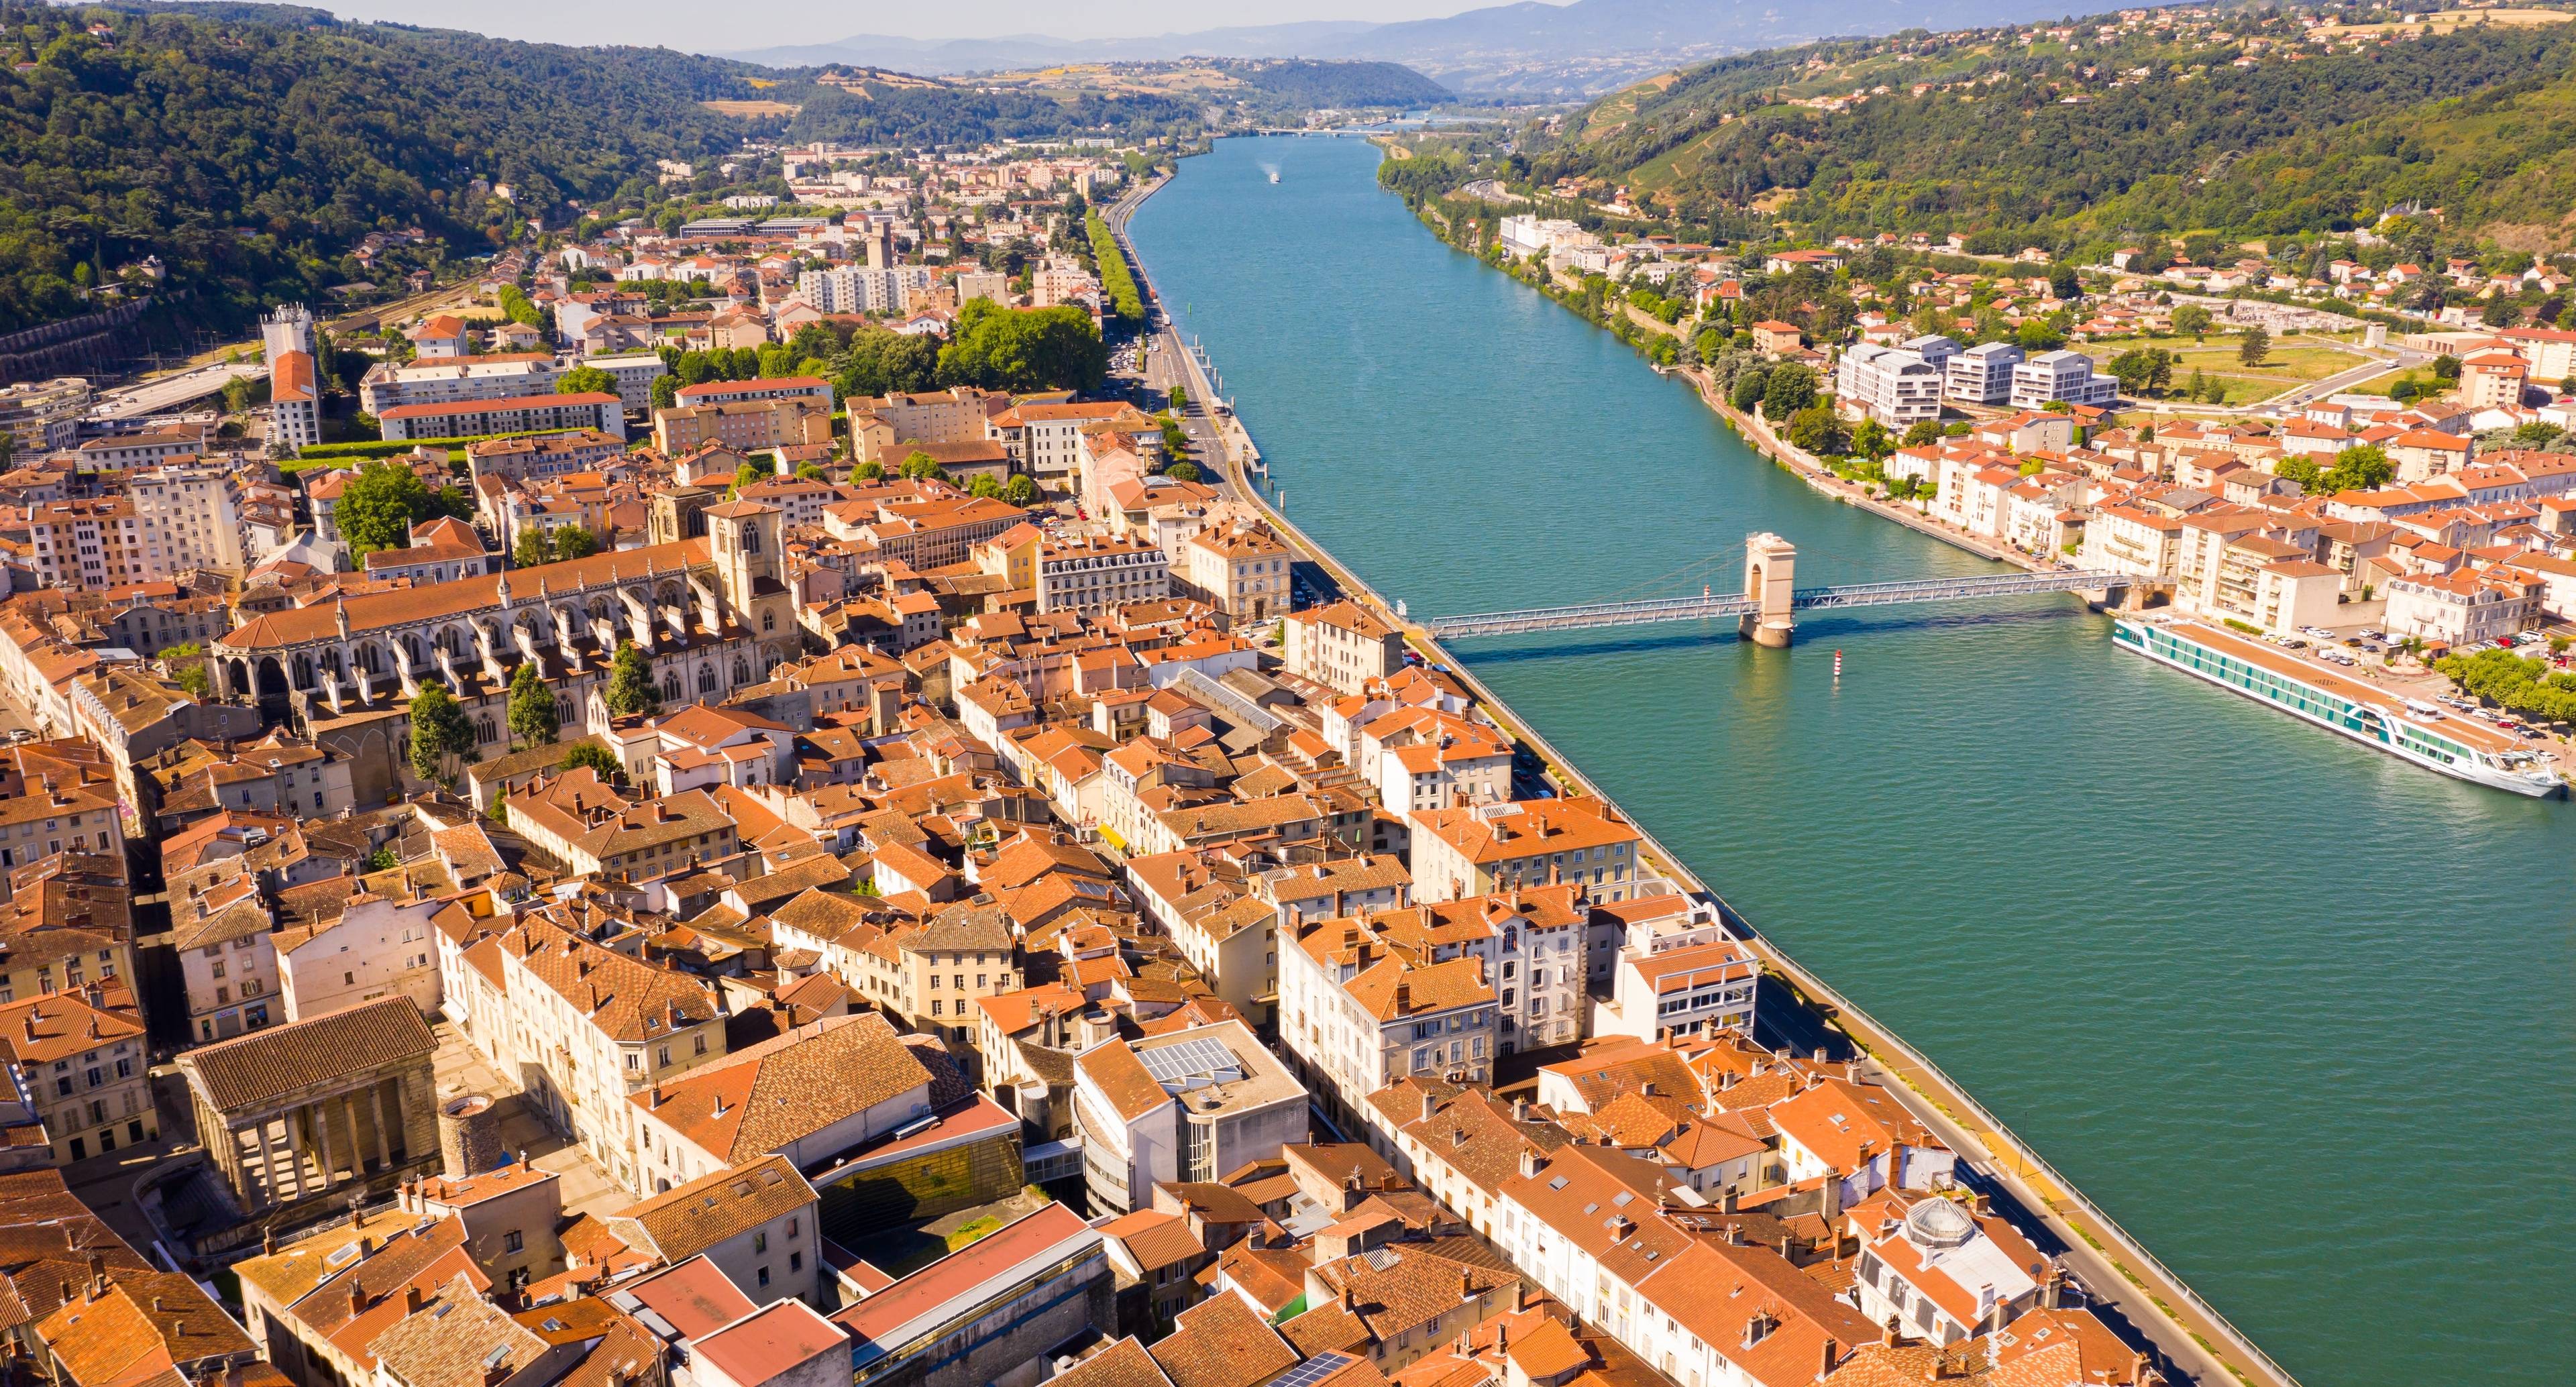 From the Curator's Eye to Culinary Delights: Paris to Vienne